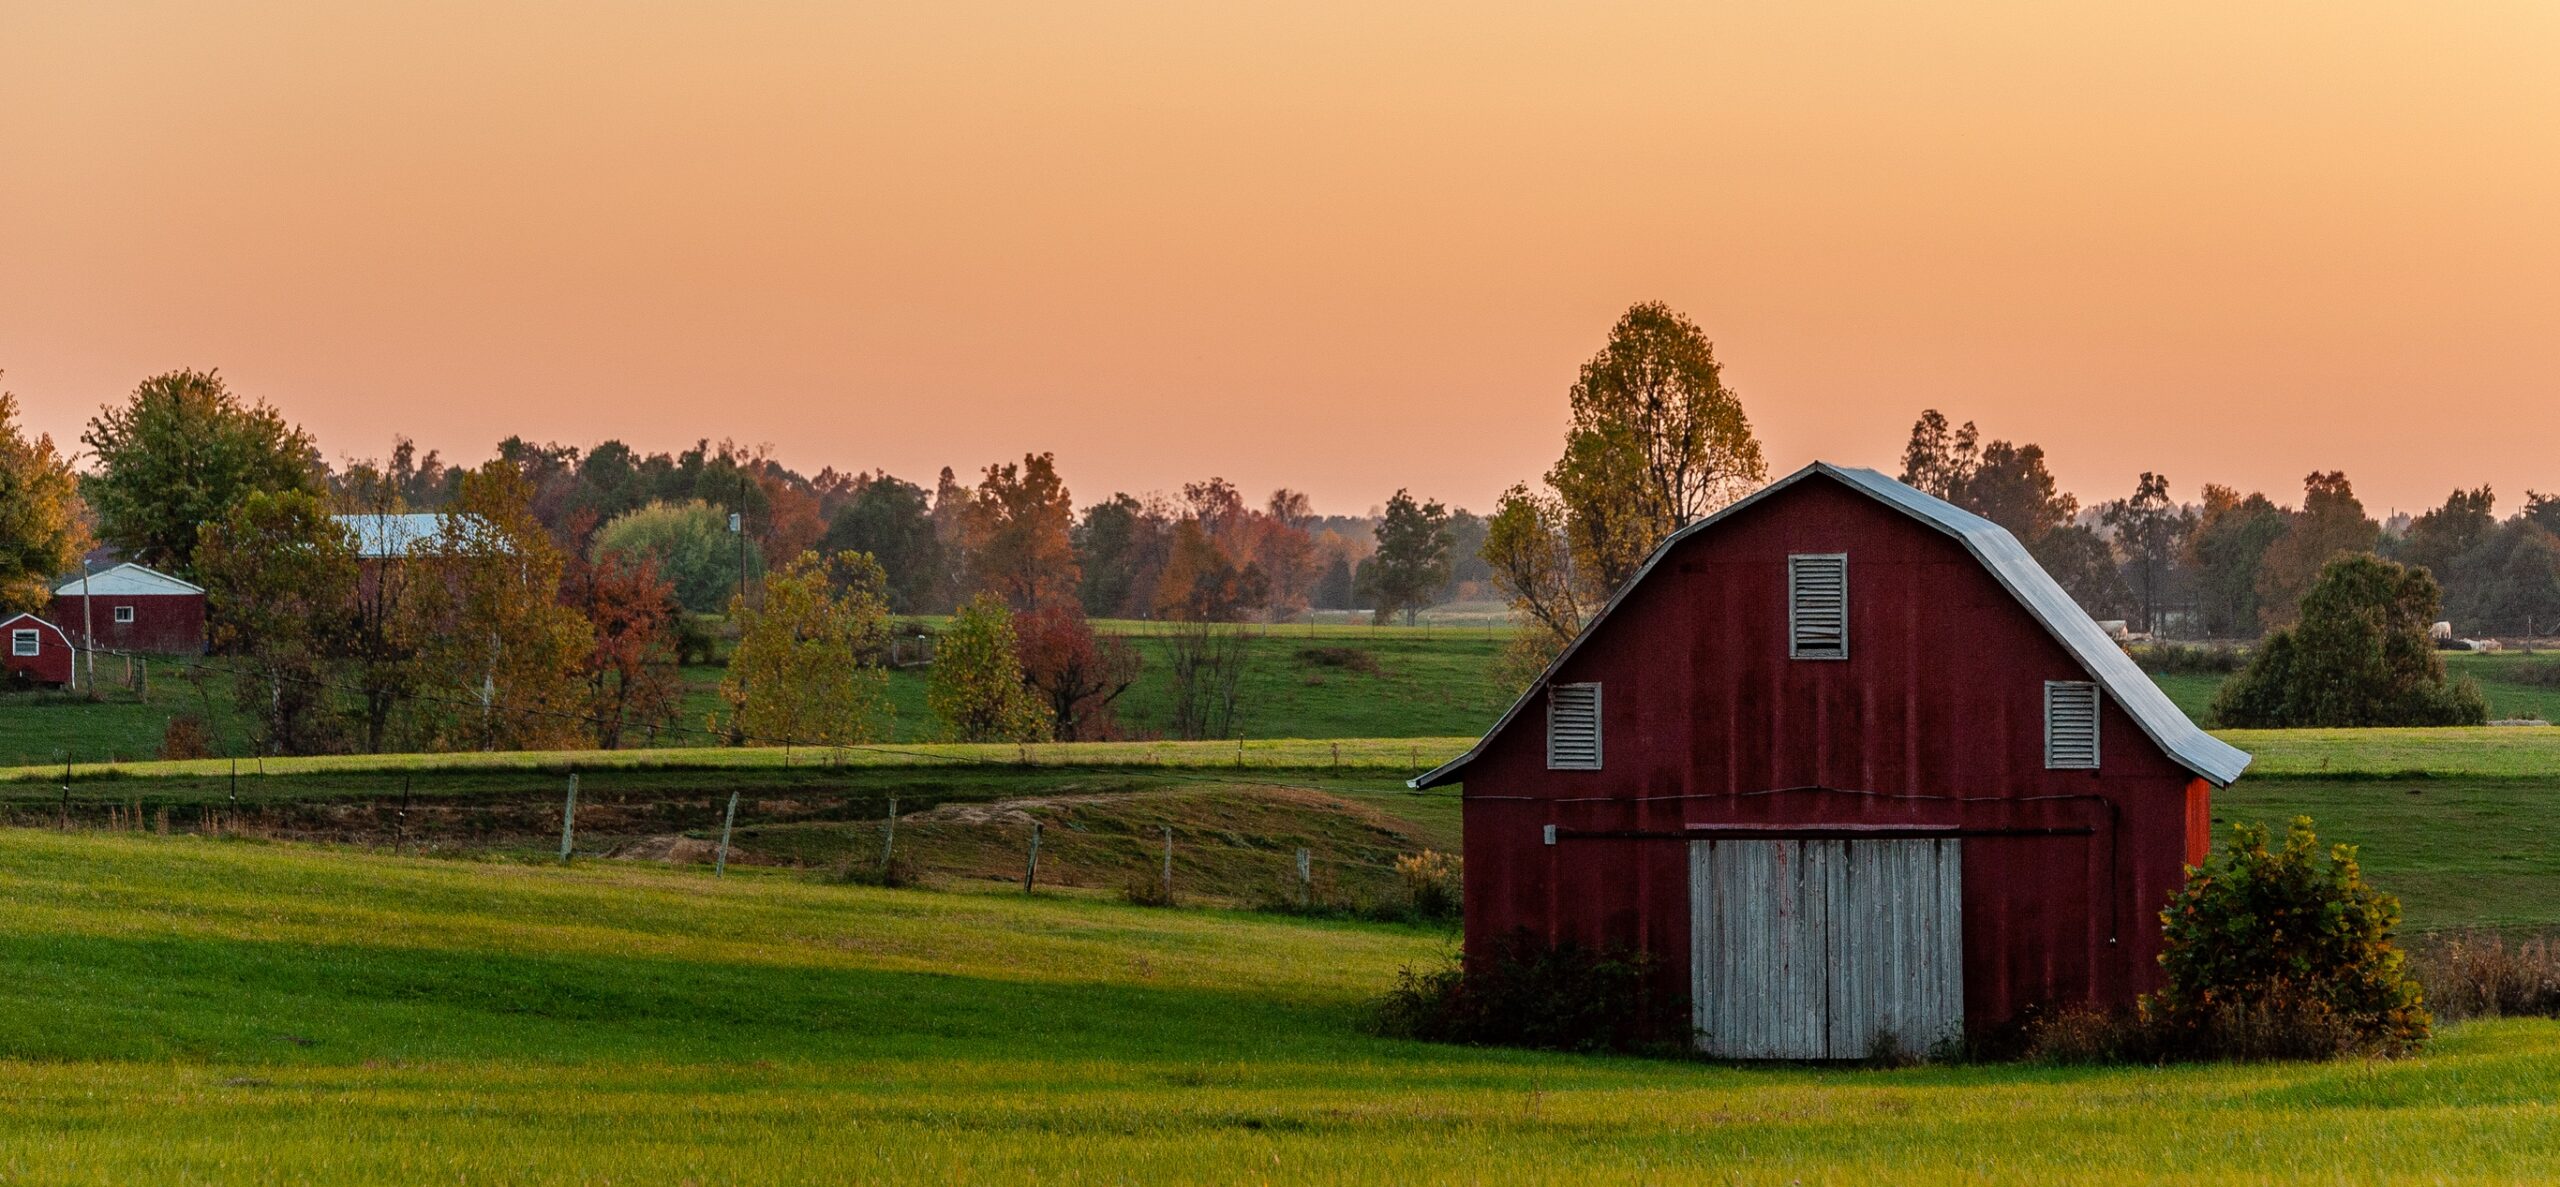 Kentucky horse barn and landscape<br />
